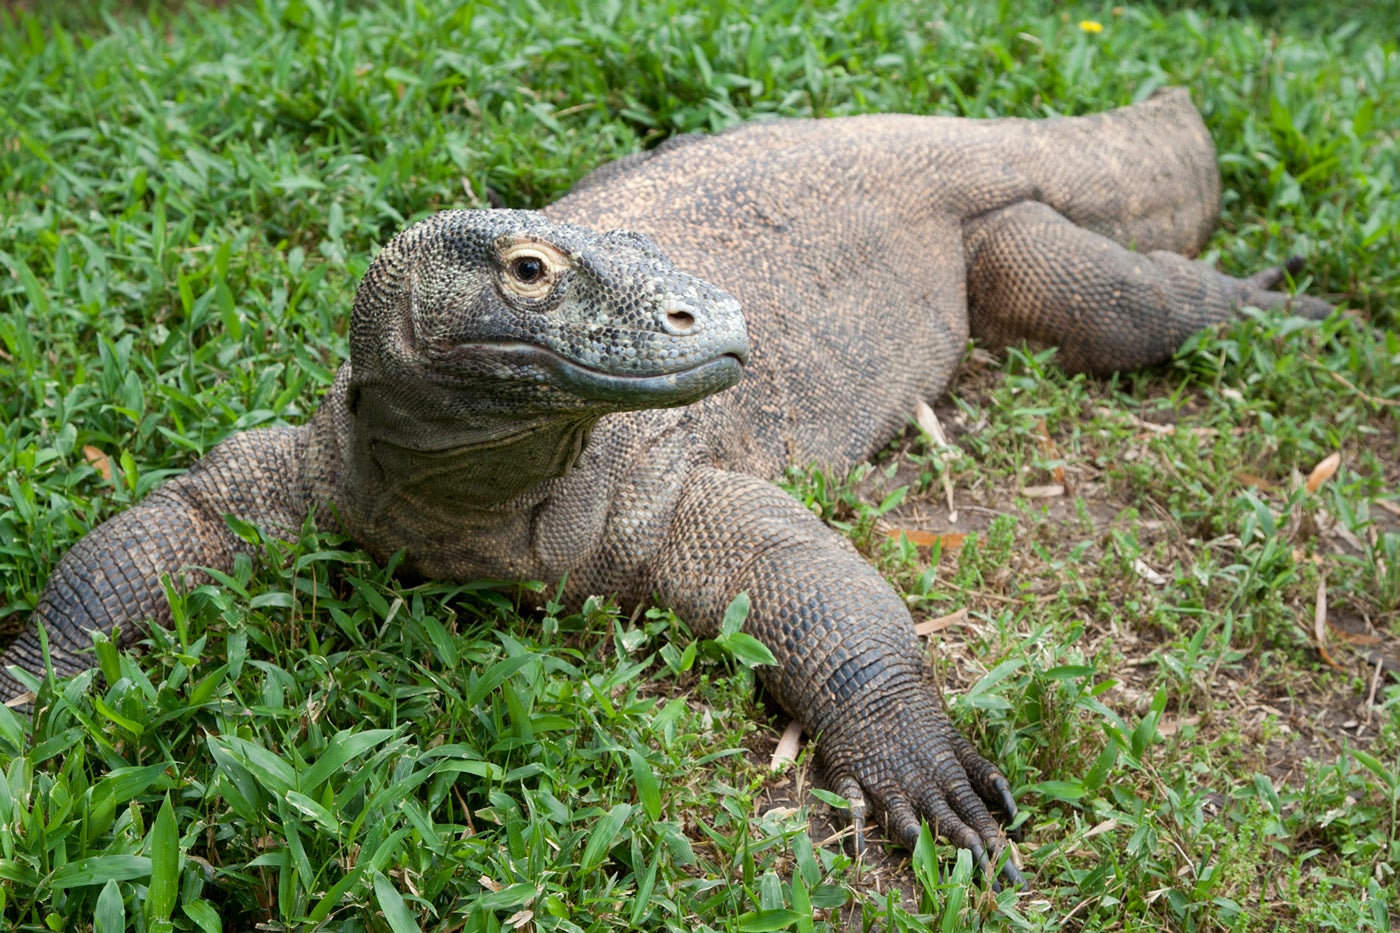 A large Komodo dragon with a heavy body, large claws and thick, scaly skin rests in a grassy yard.